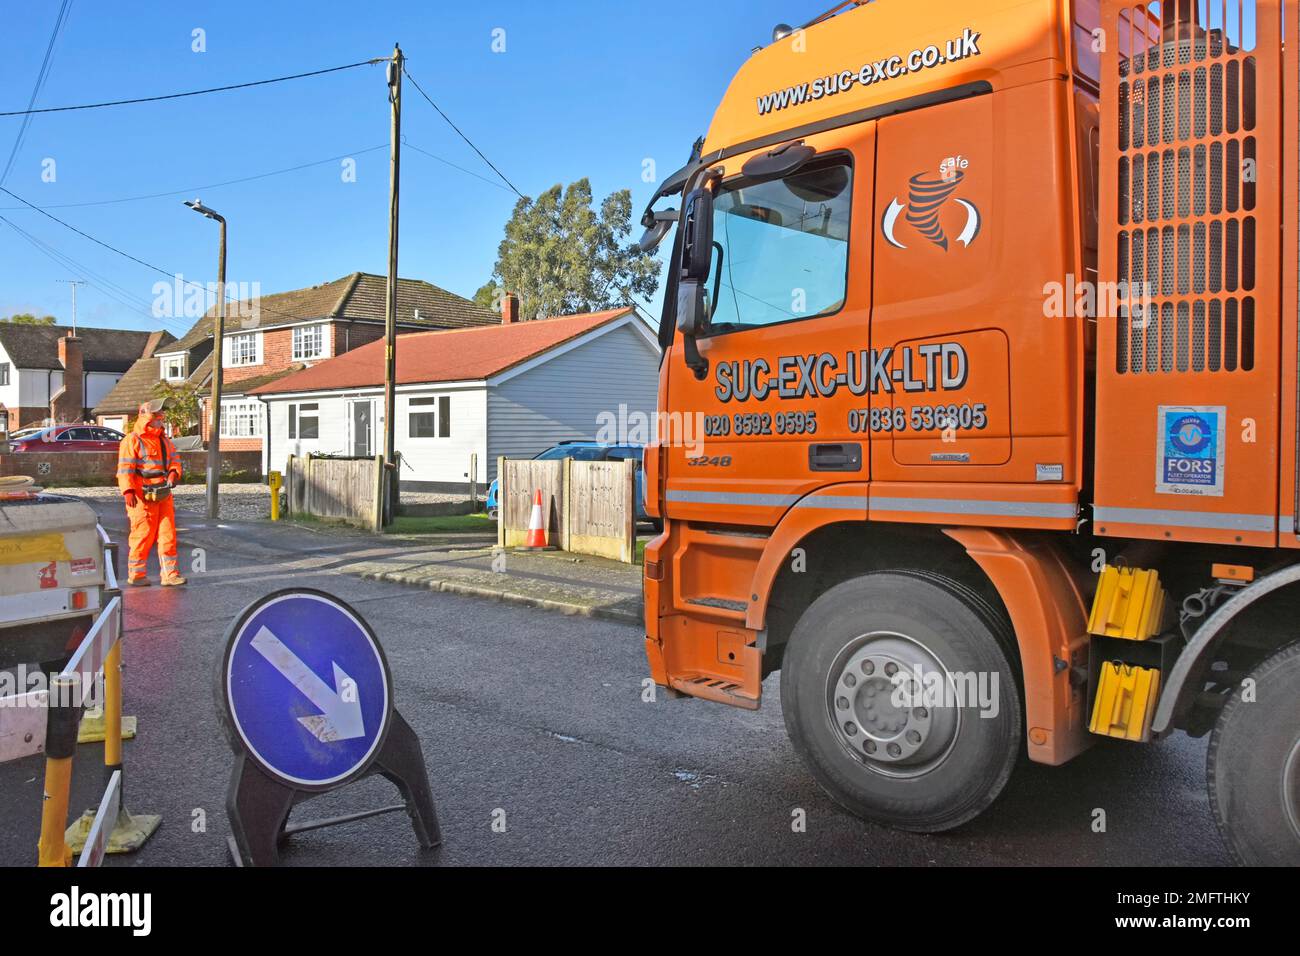 Hgv lorry truck driver in residential street slowly moving large suction excavation machine by remote control for gas main replacement work England UK Stock Photo